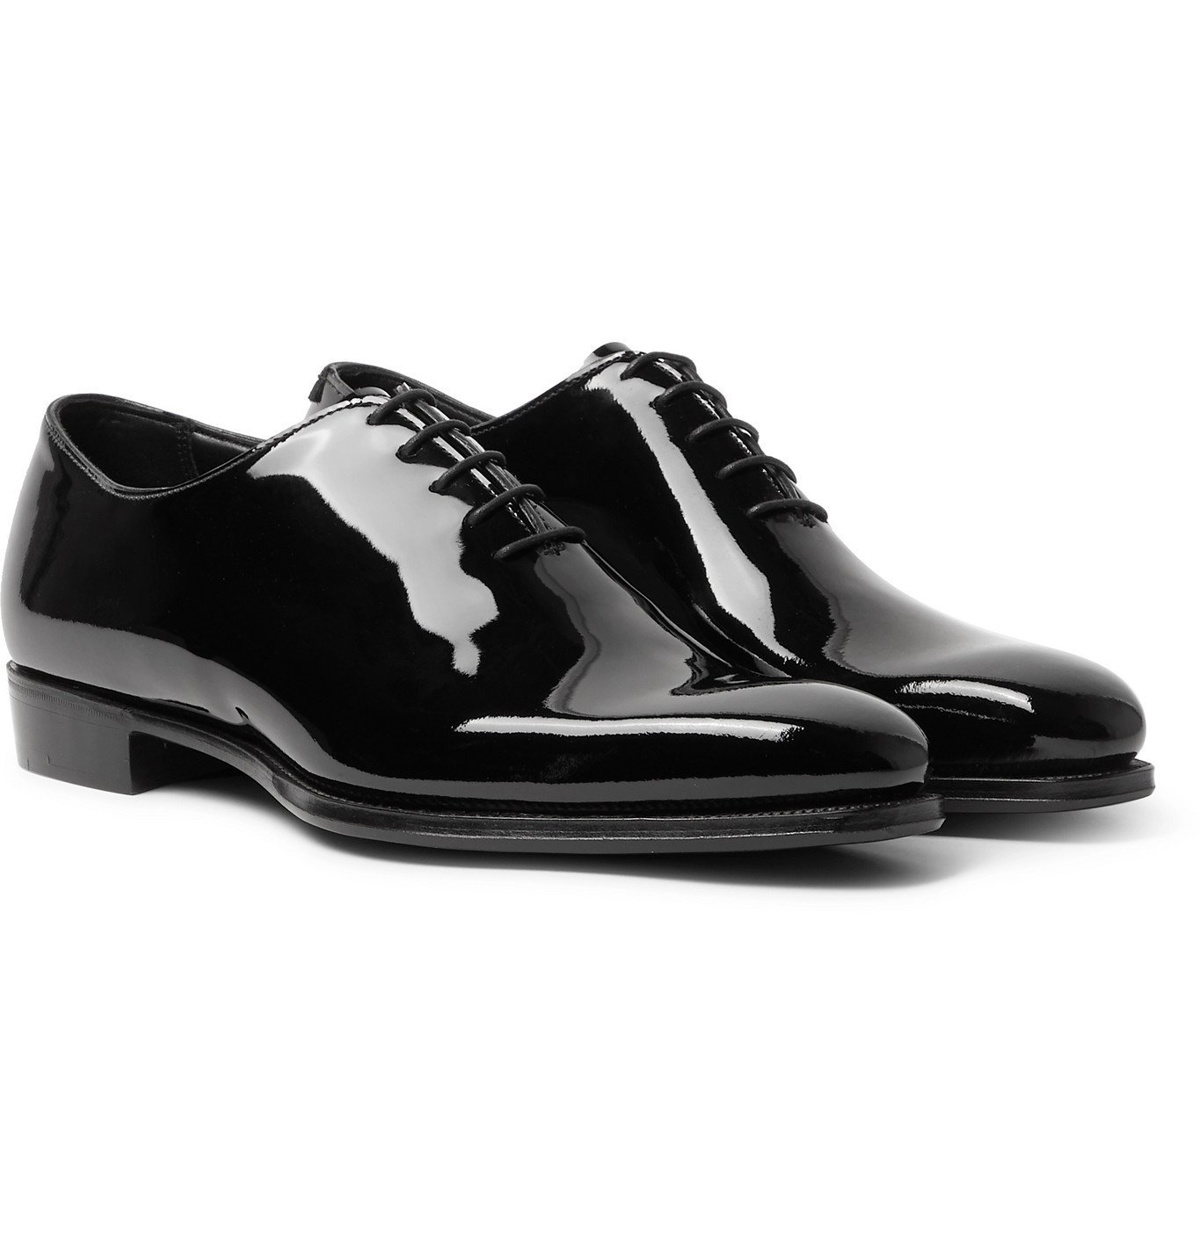 George - Whole-Cut Patent-Leather Oxford Shoes - Black George